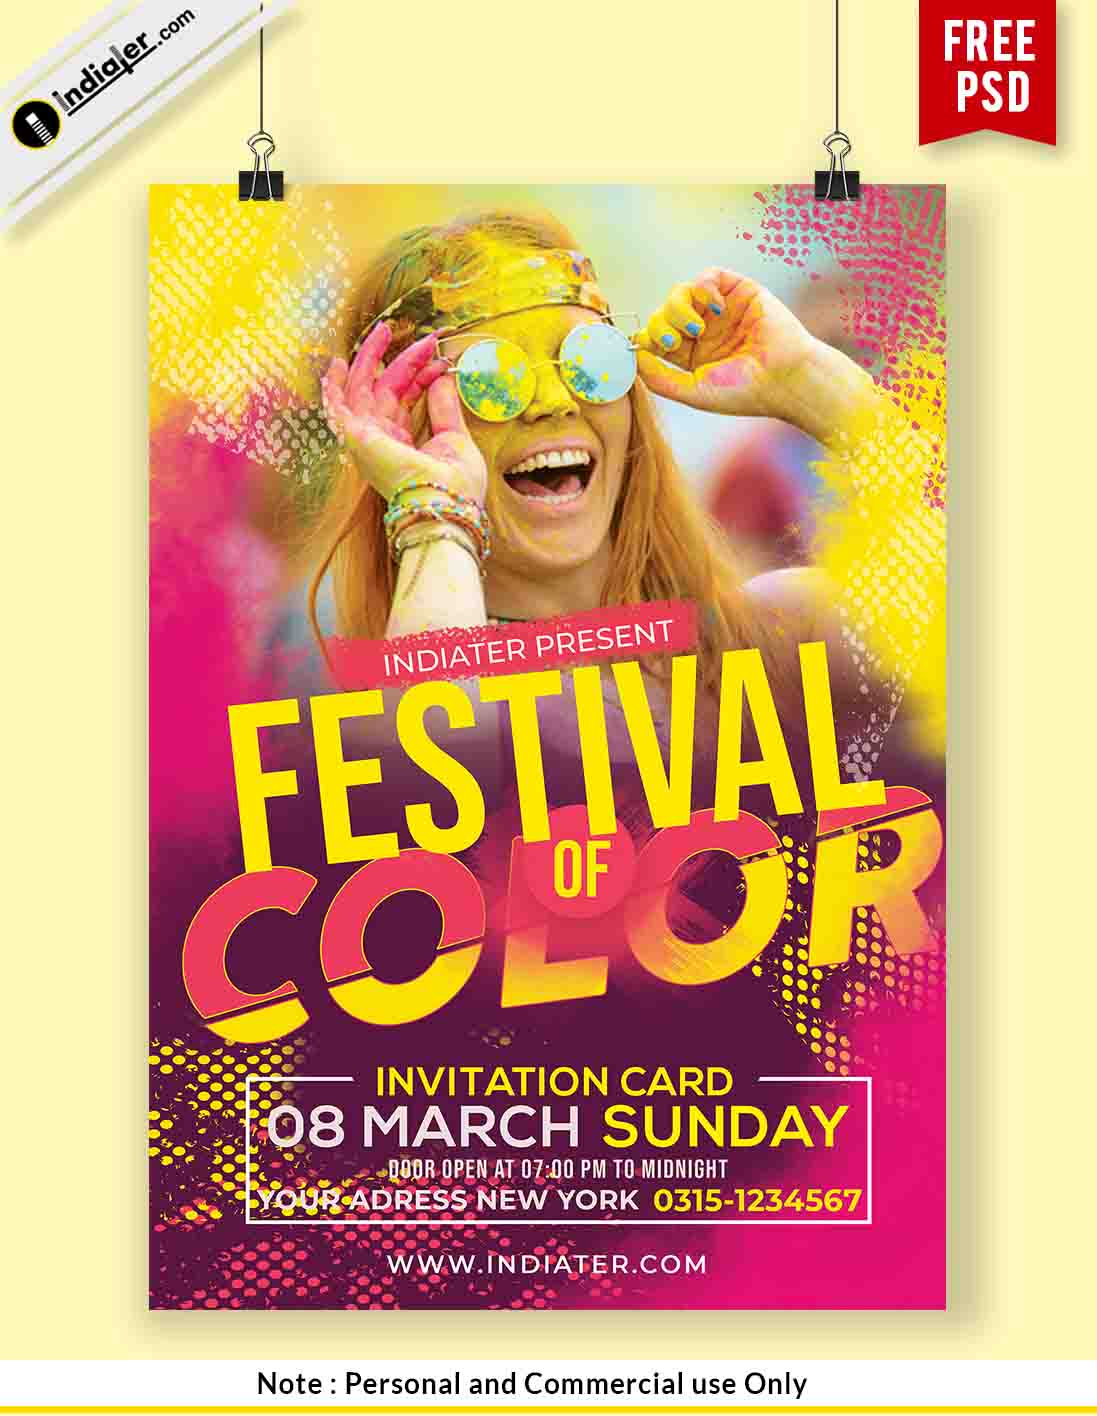 Festival Of Colors Holi Celebration Flyer Free Psd Template Indiater